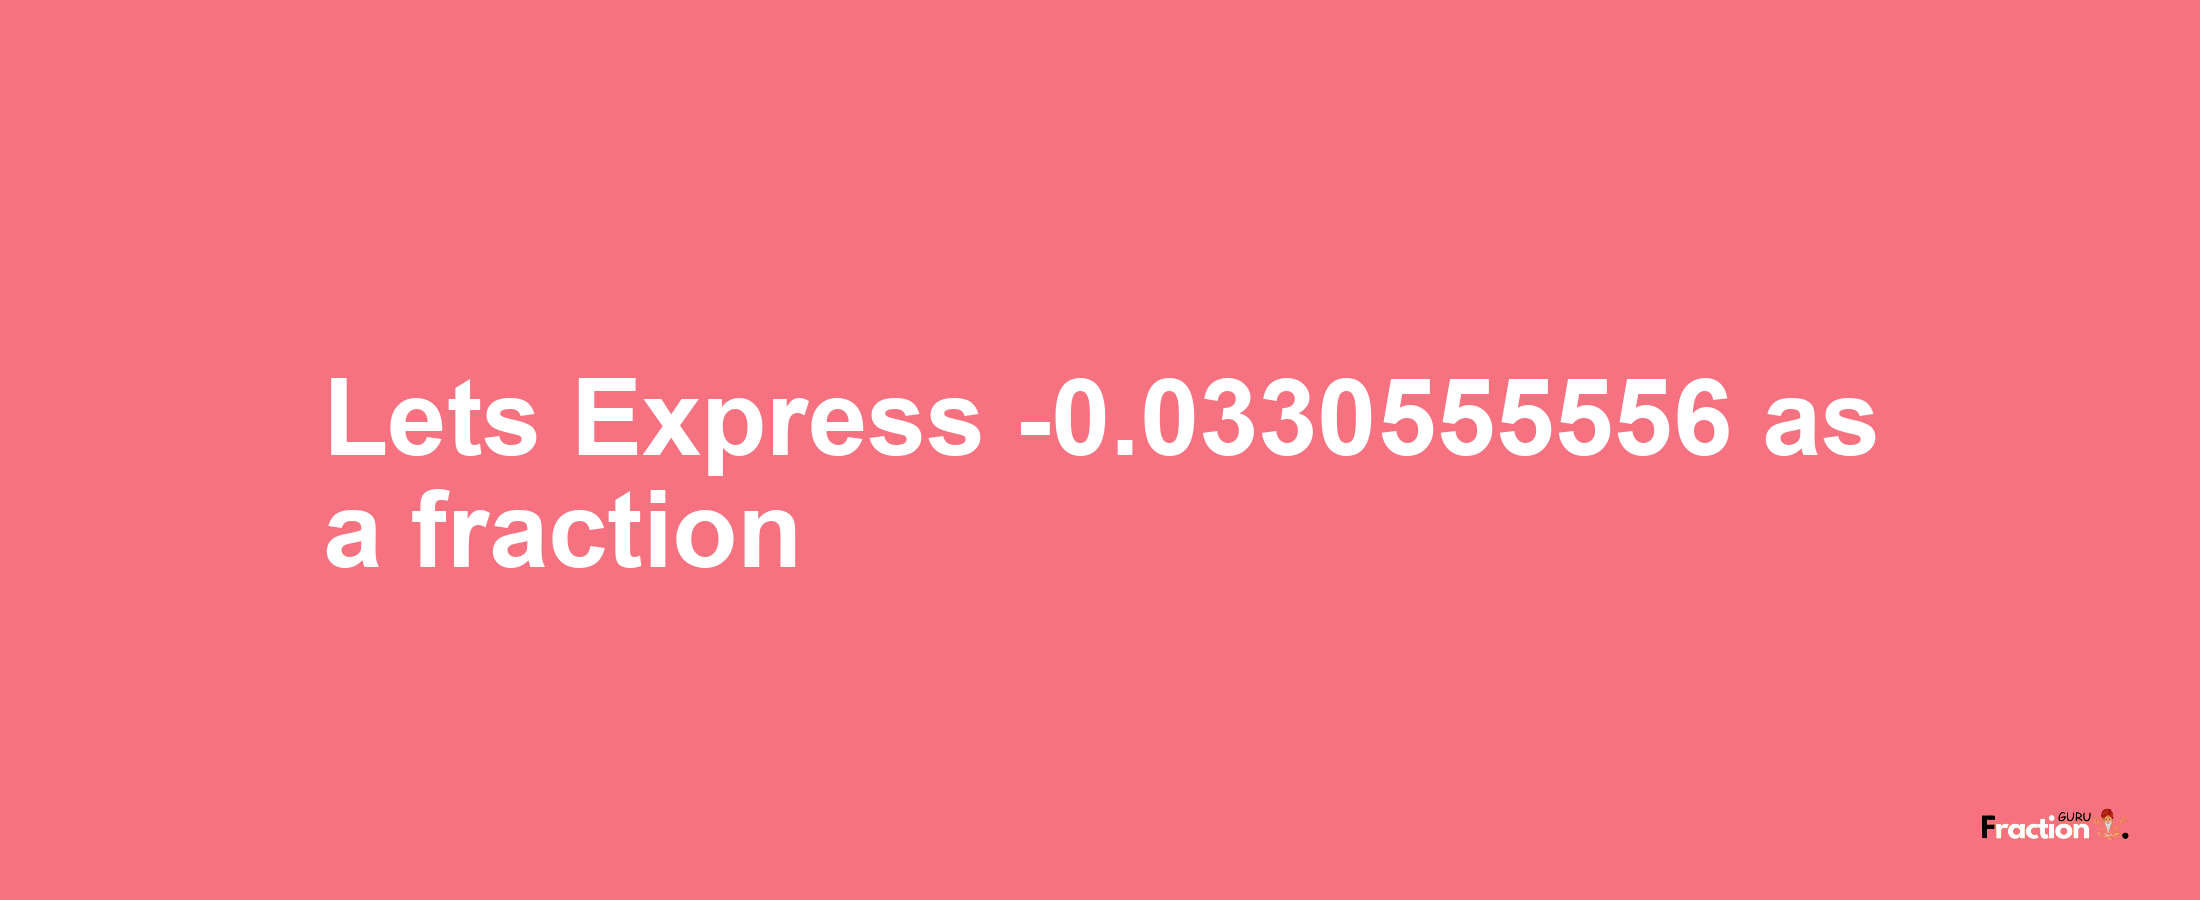 Lets Express -0.0330555556 as afraction